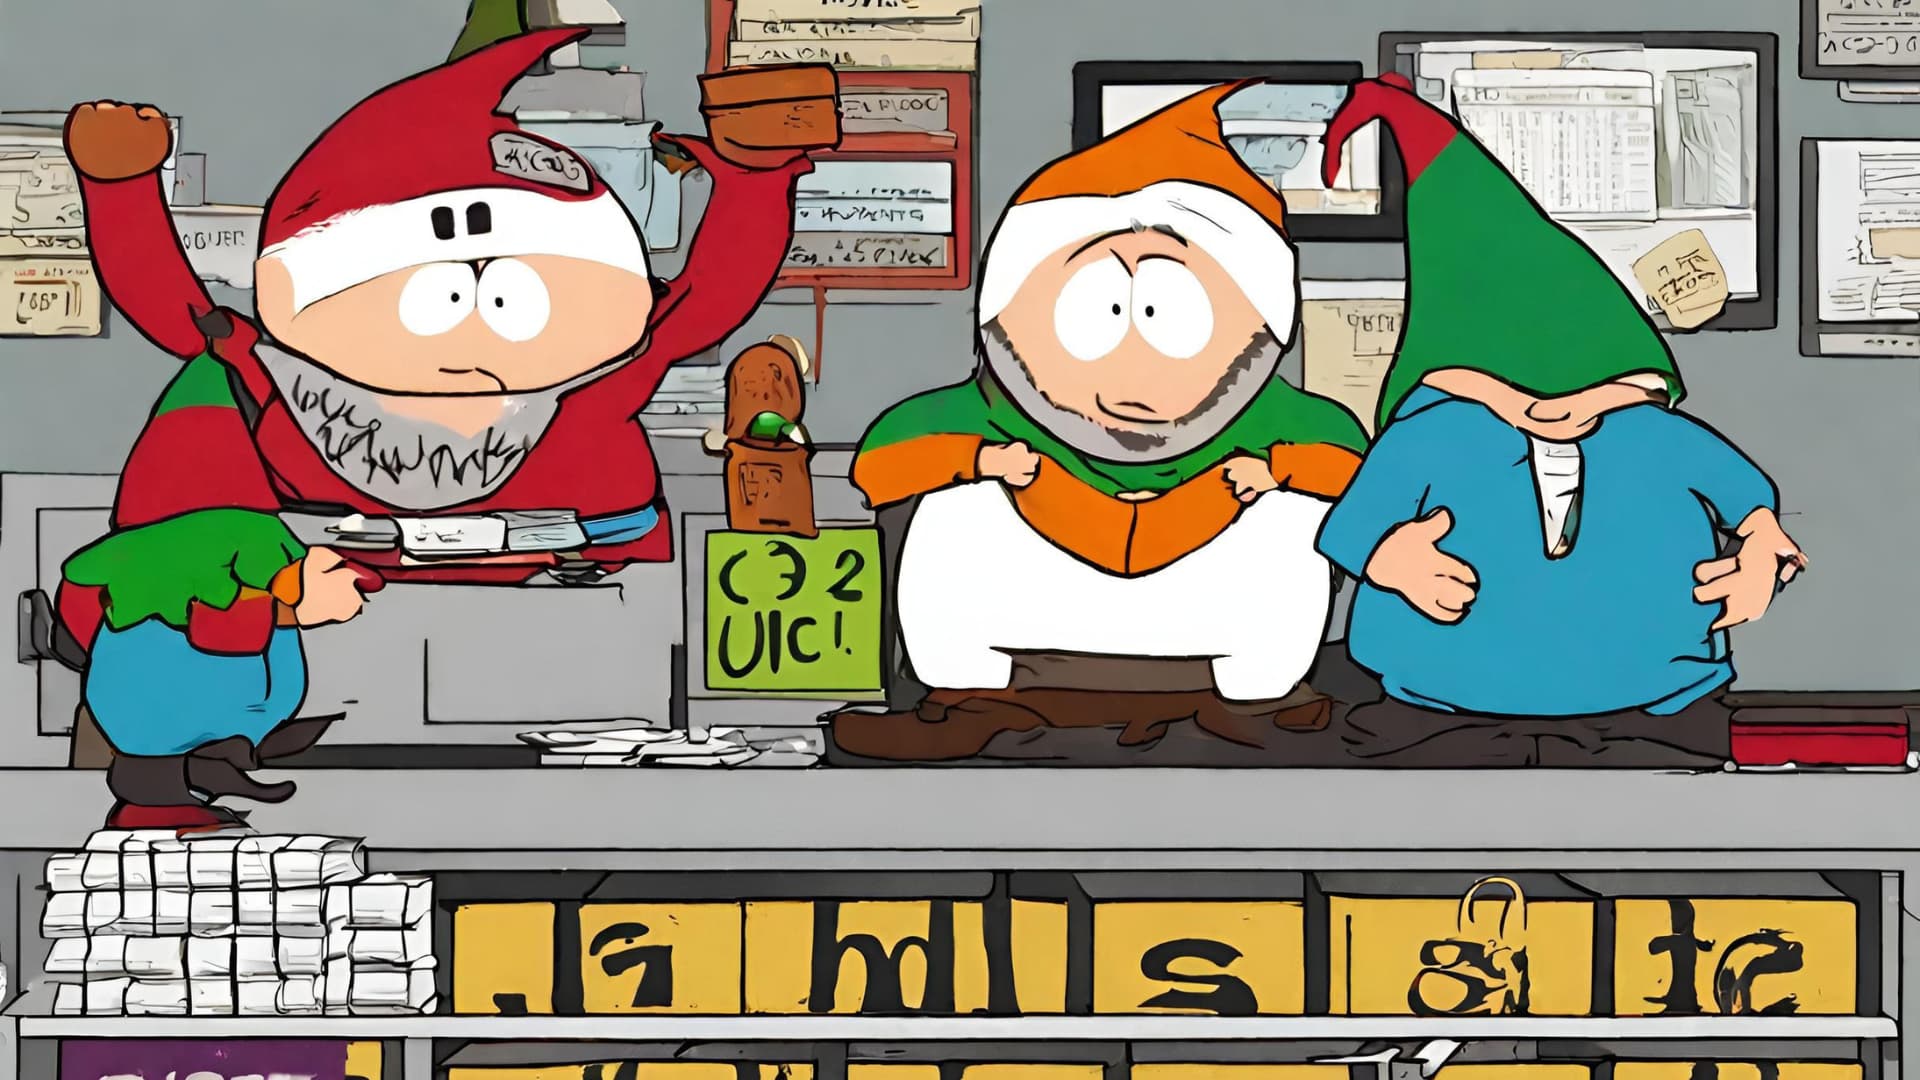 Messing with Canva Magic Studio - “South Park underpants gnomes 1) product 2) ??? 3) profit!”